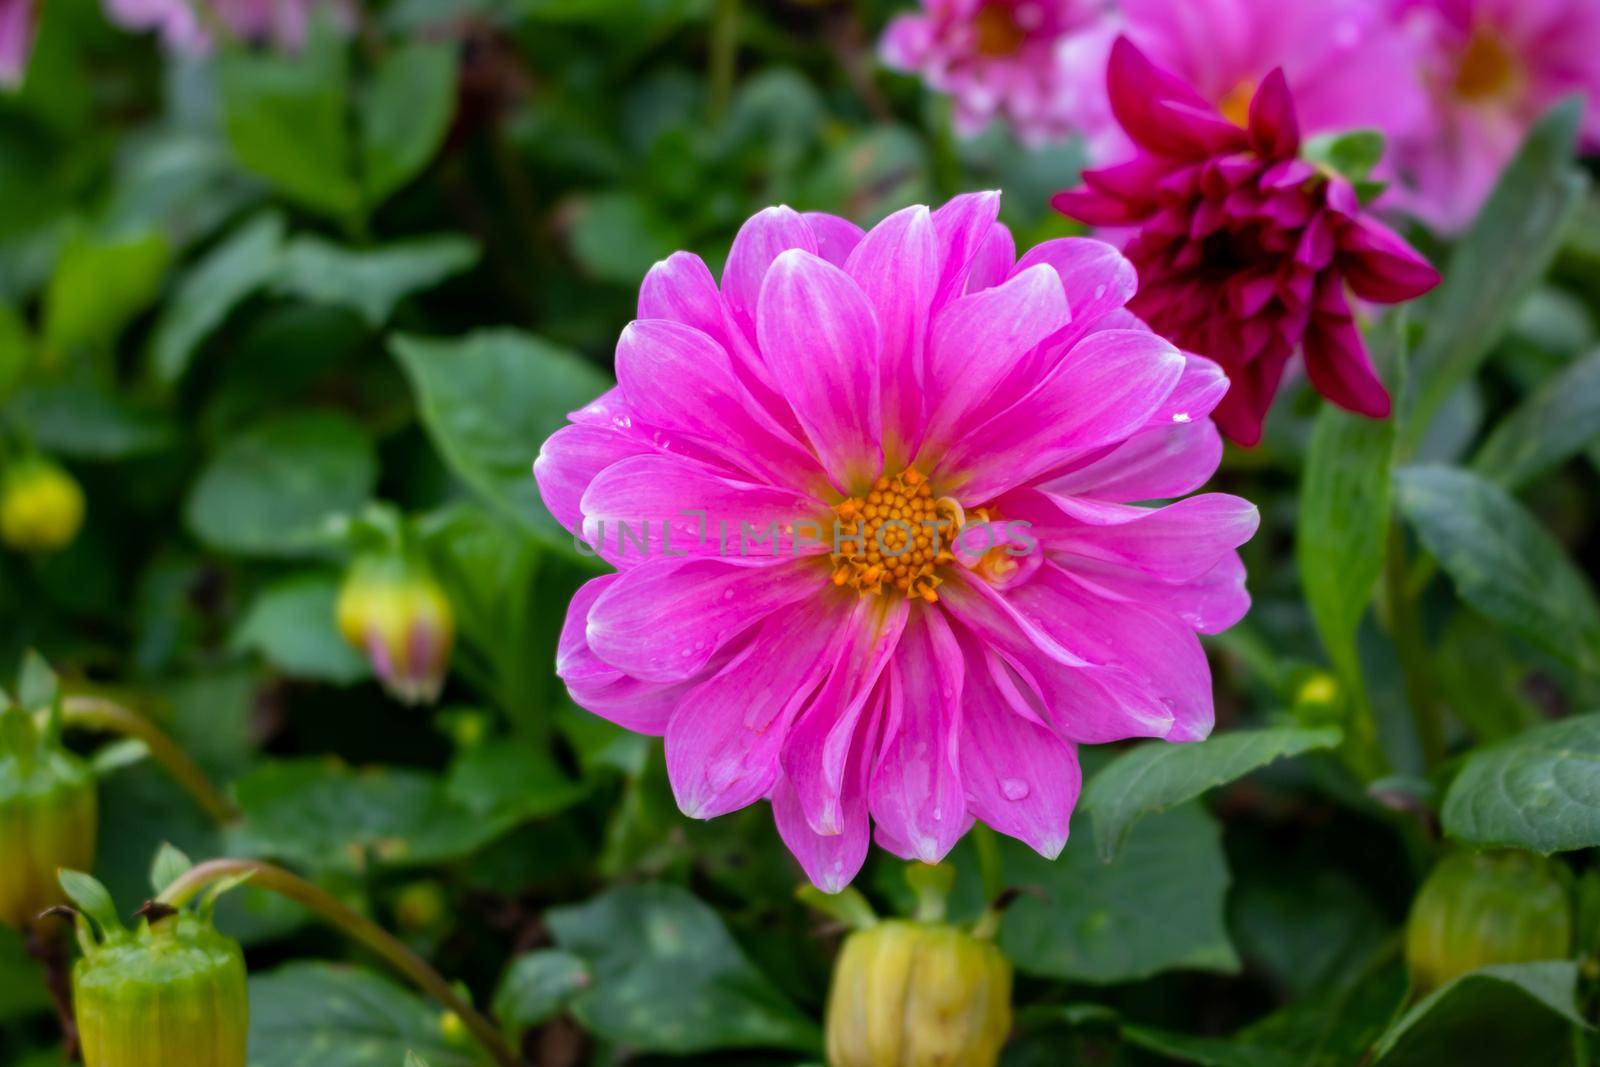 Pink Dahlia flower. This flower is A group of collarette dahlias.